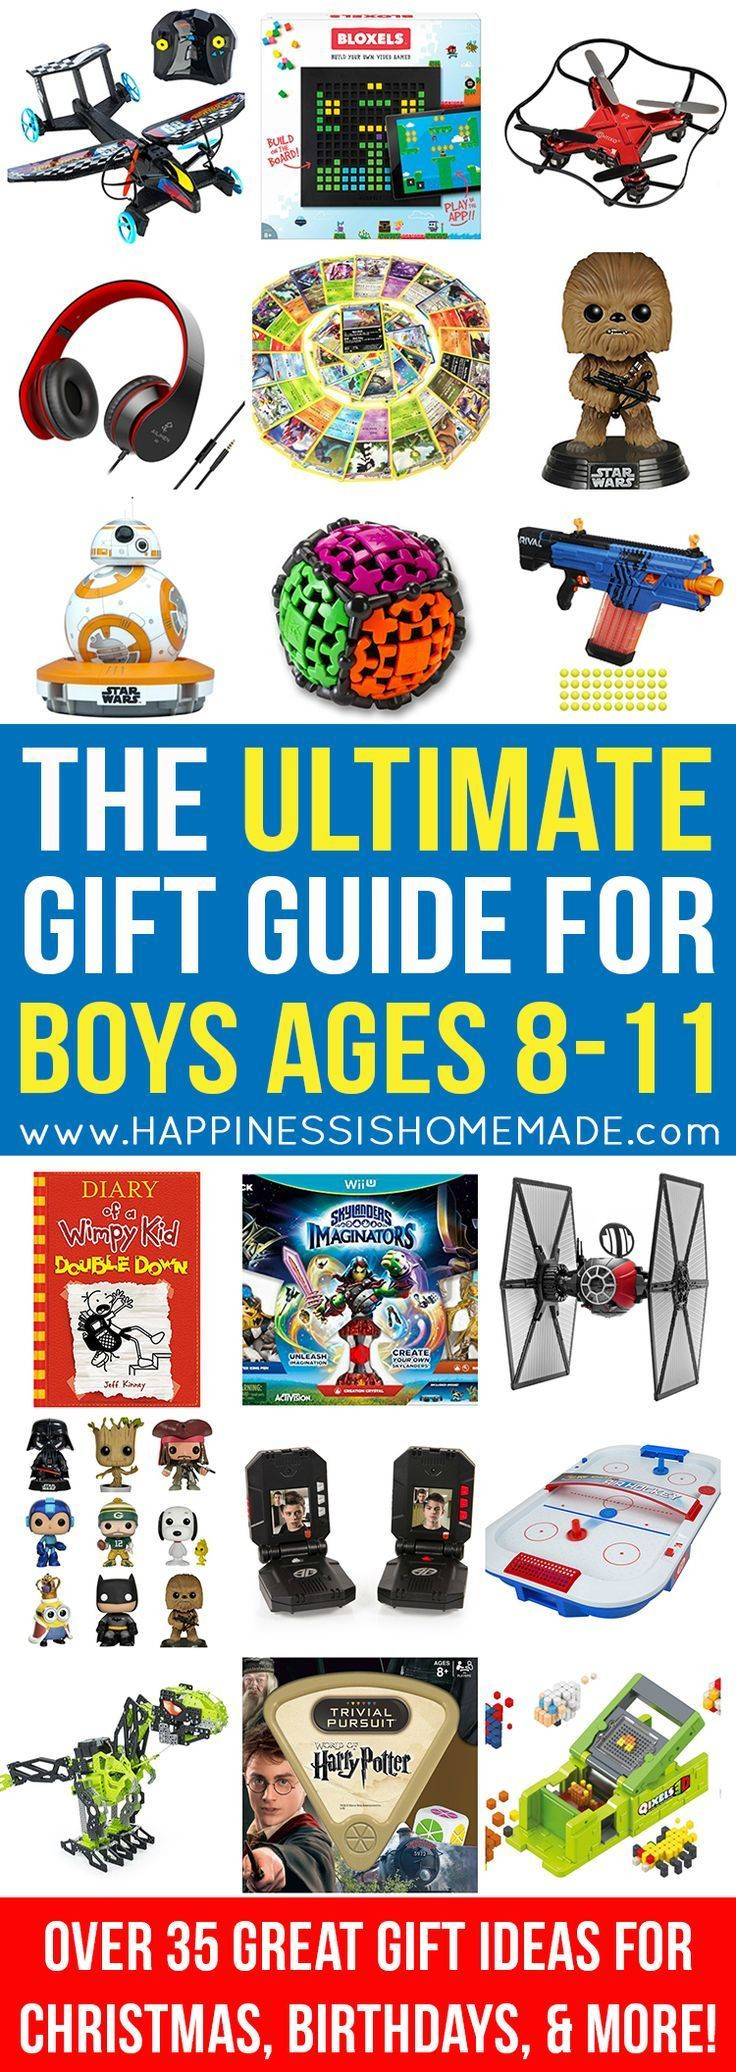 Boys Gift Ideas Age 8
 120 best images about Best Toys for 8 Year Old Girls on